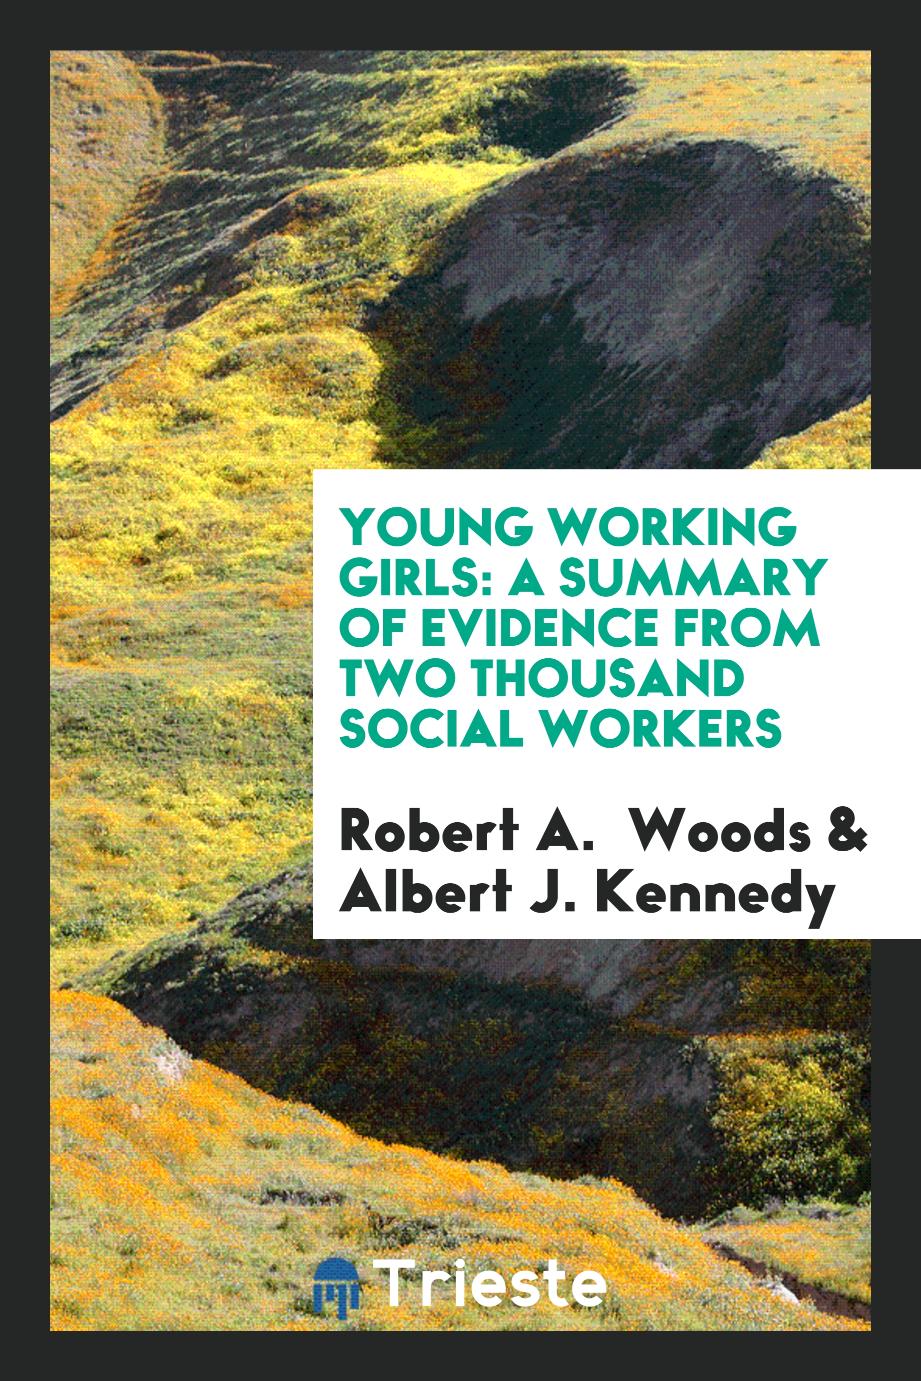 Young working girls: a summary of evidence from two thousand social workers